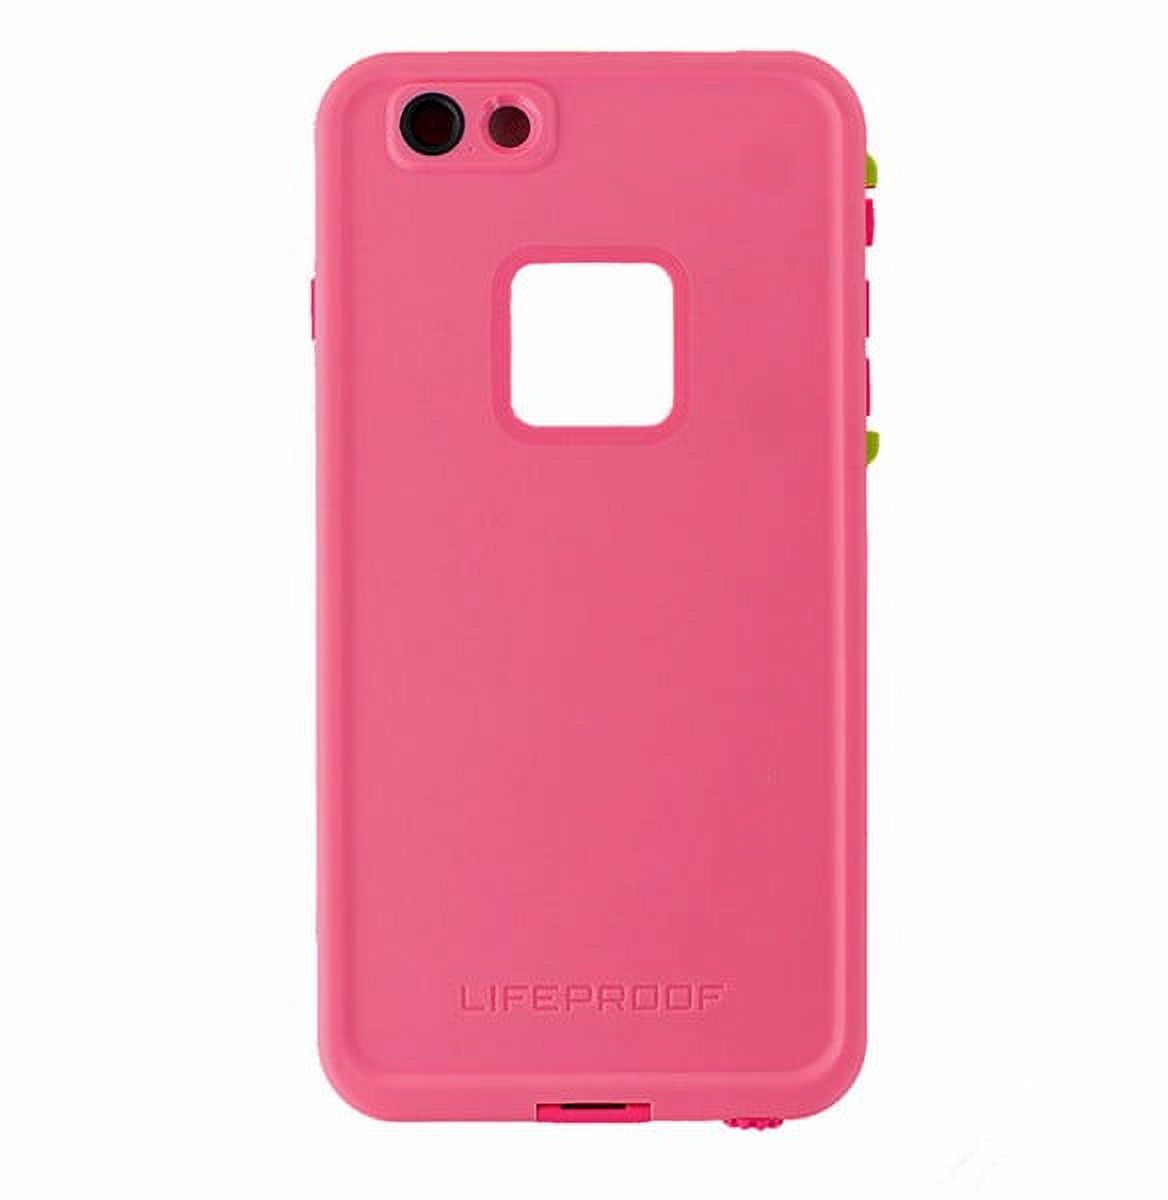 iPhone 6 plus/6s plus Lifeproof fre case, sunset pink - image 3 of 4